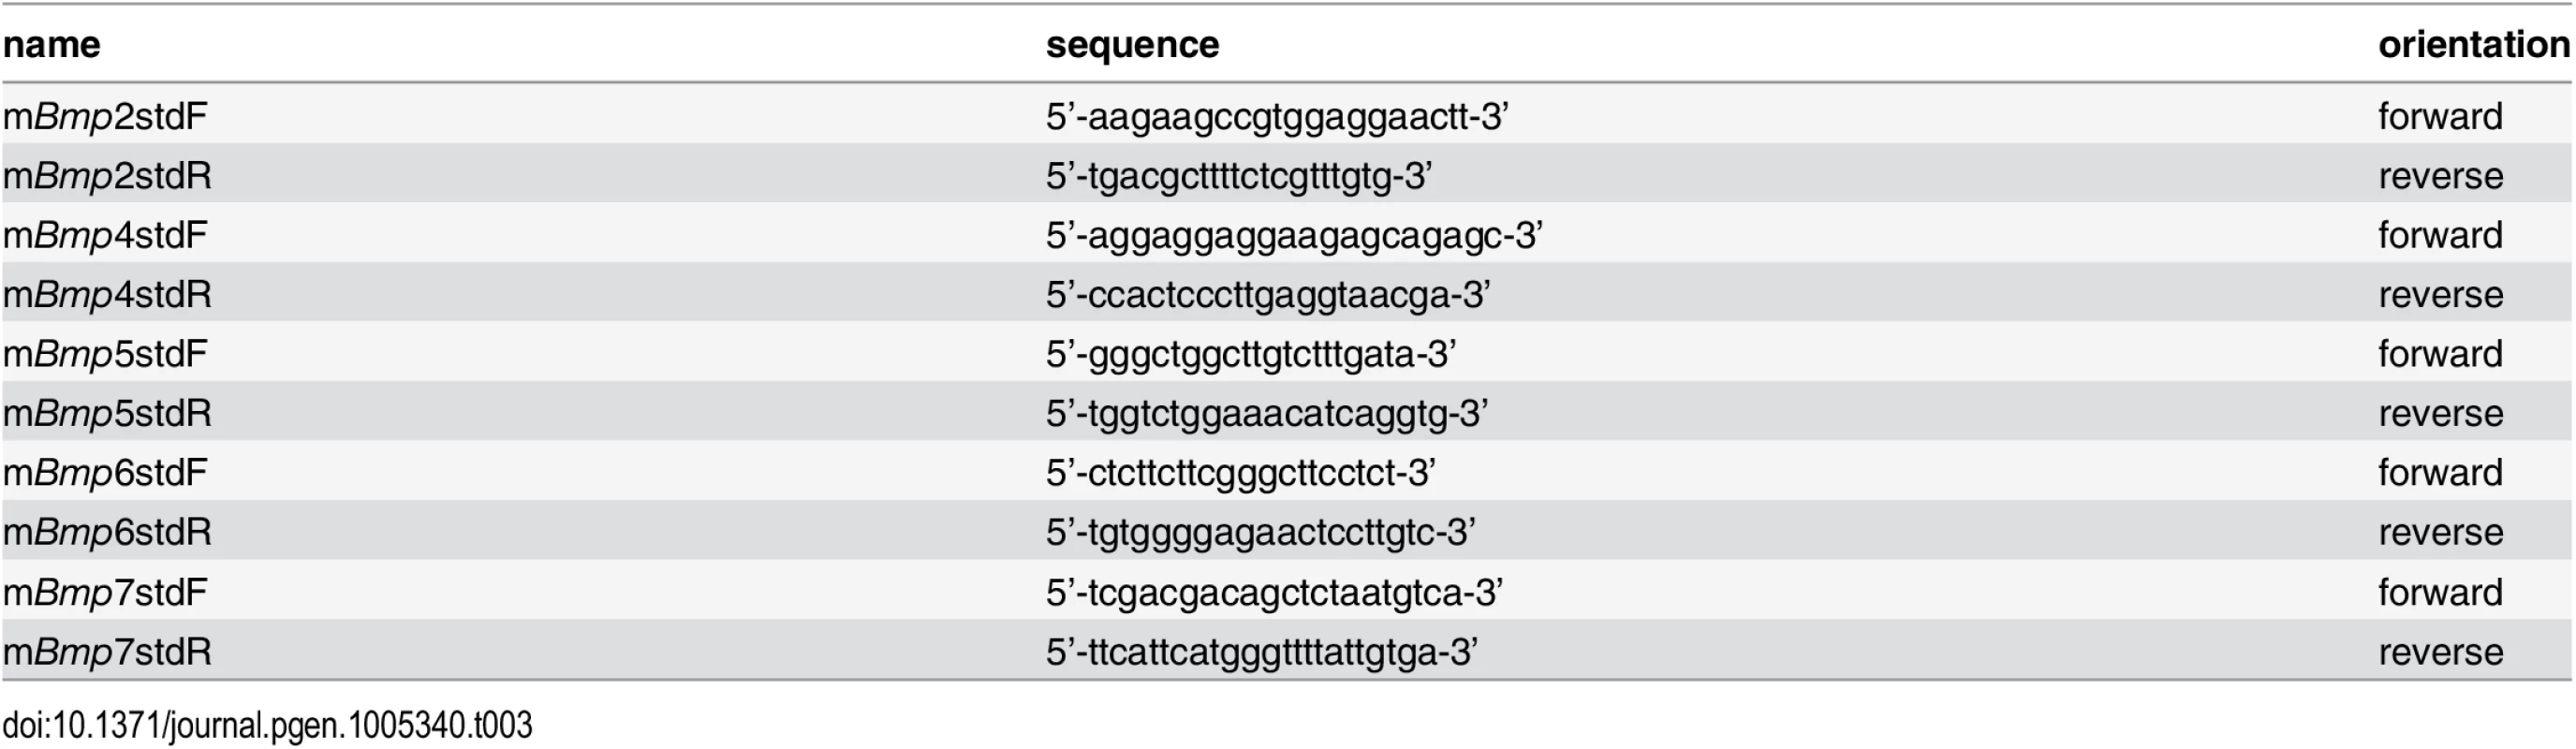 Primers for generating template standards to absolutely quantitate BMP mRNA amounts.